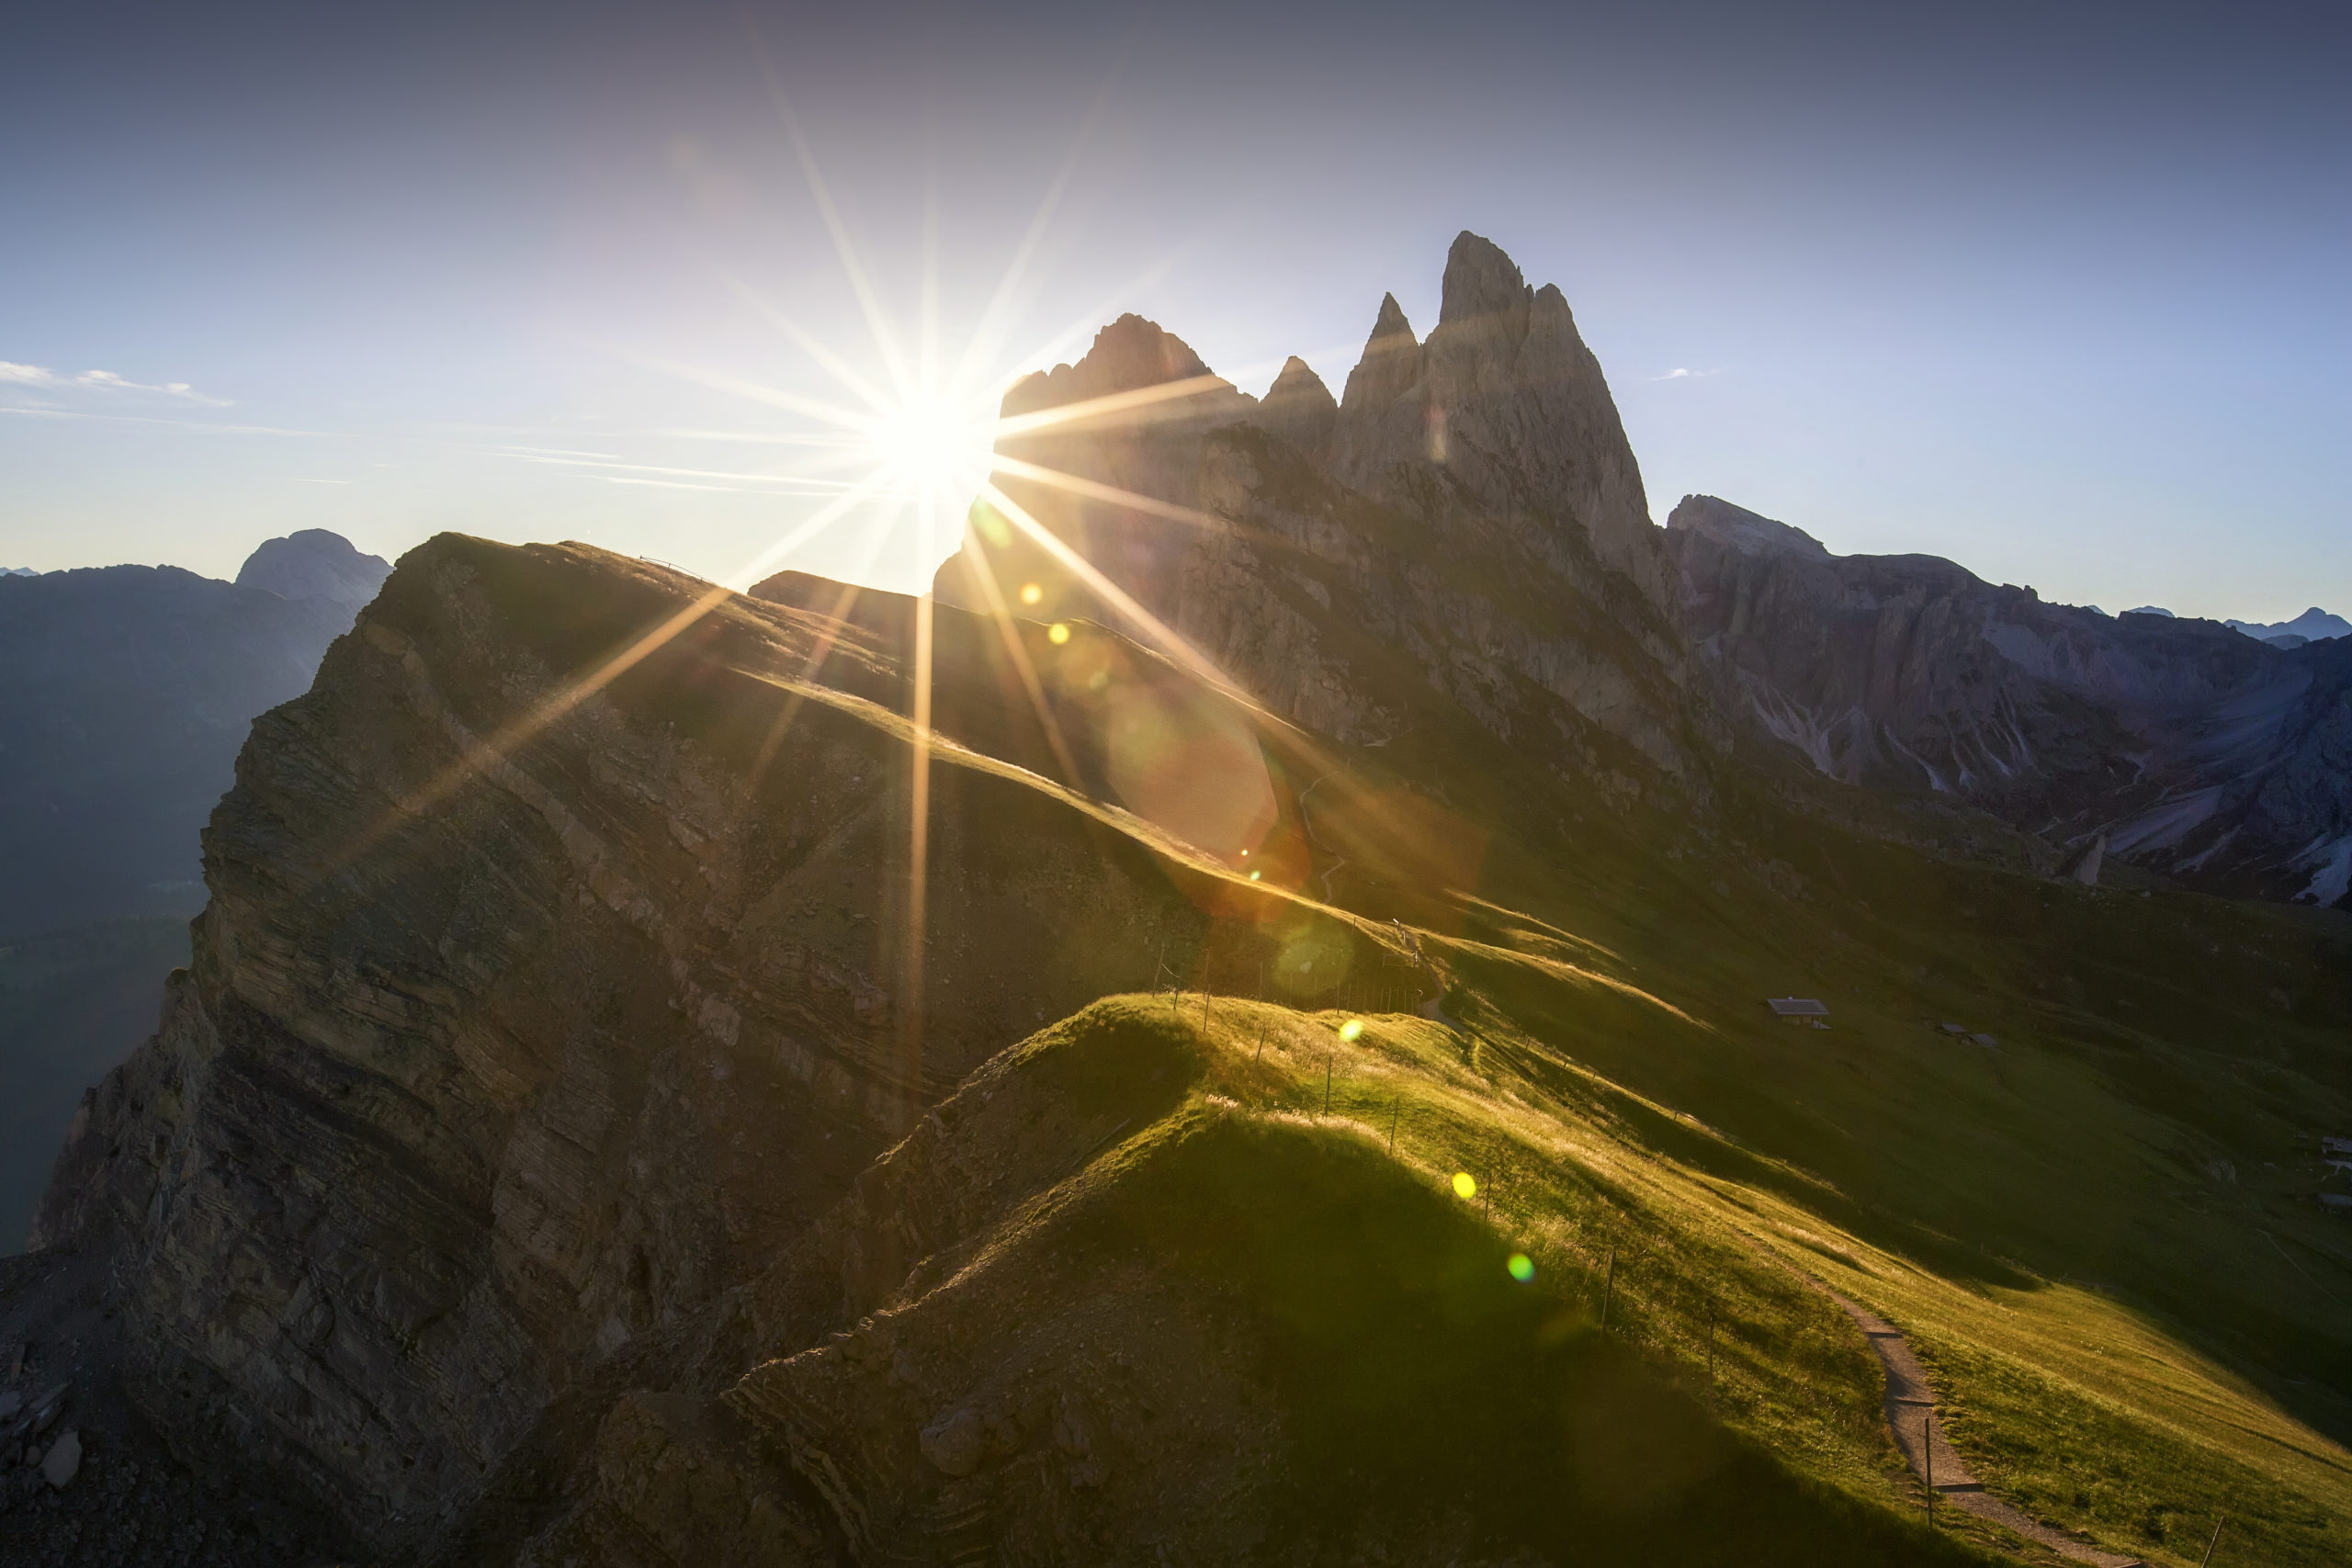 The Alpe di Seceda is located on the sunny side of Val Gardena, at the foot of the Parco Naturale Cisles-Odle,Dolomites Province of South Tyrol, Trentino-Alto Adige, Italy, Europe